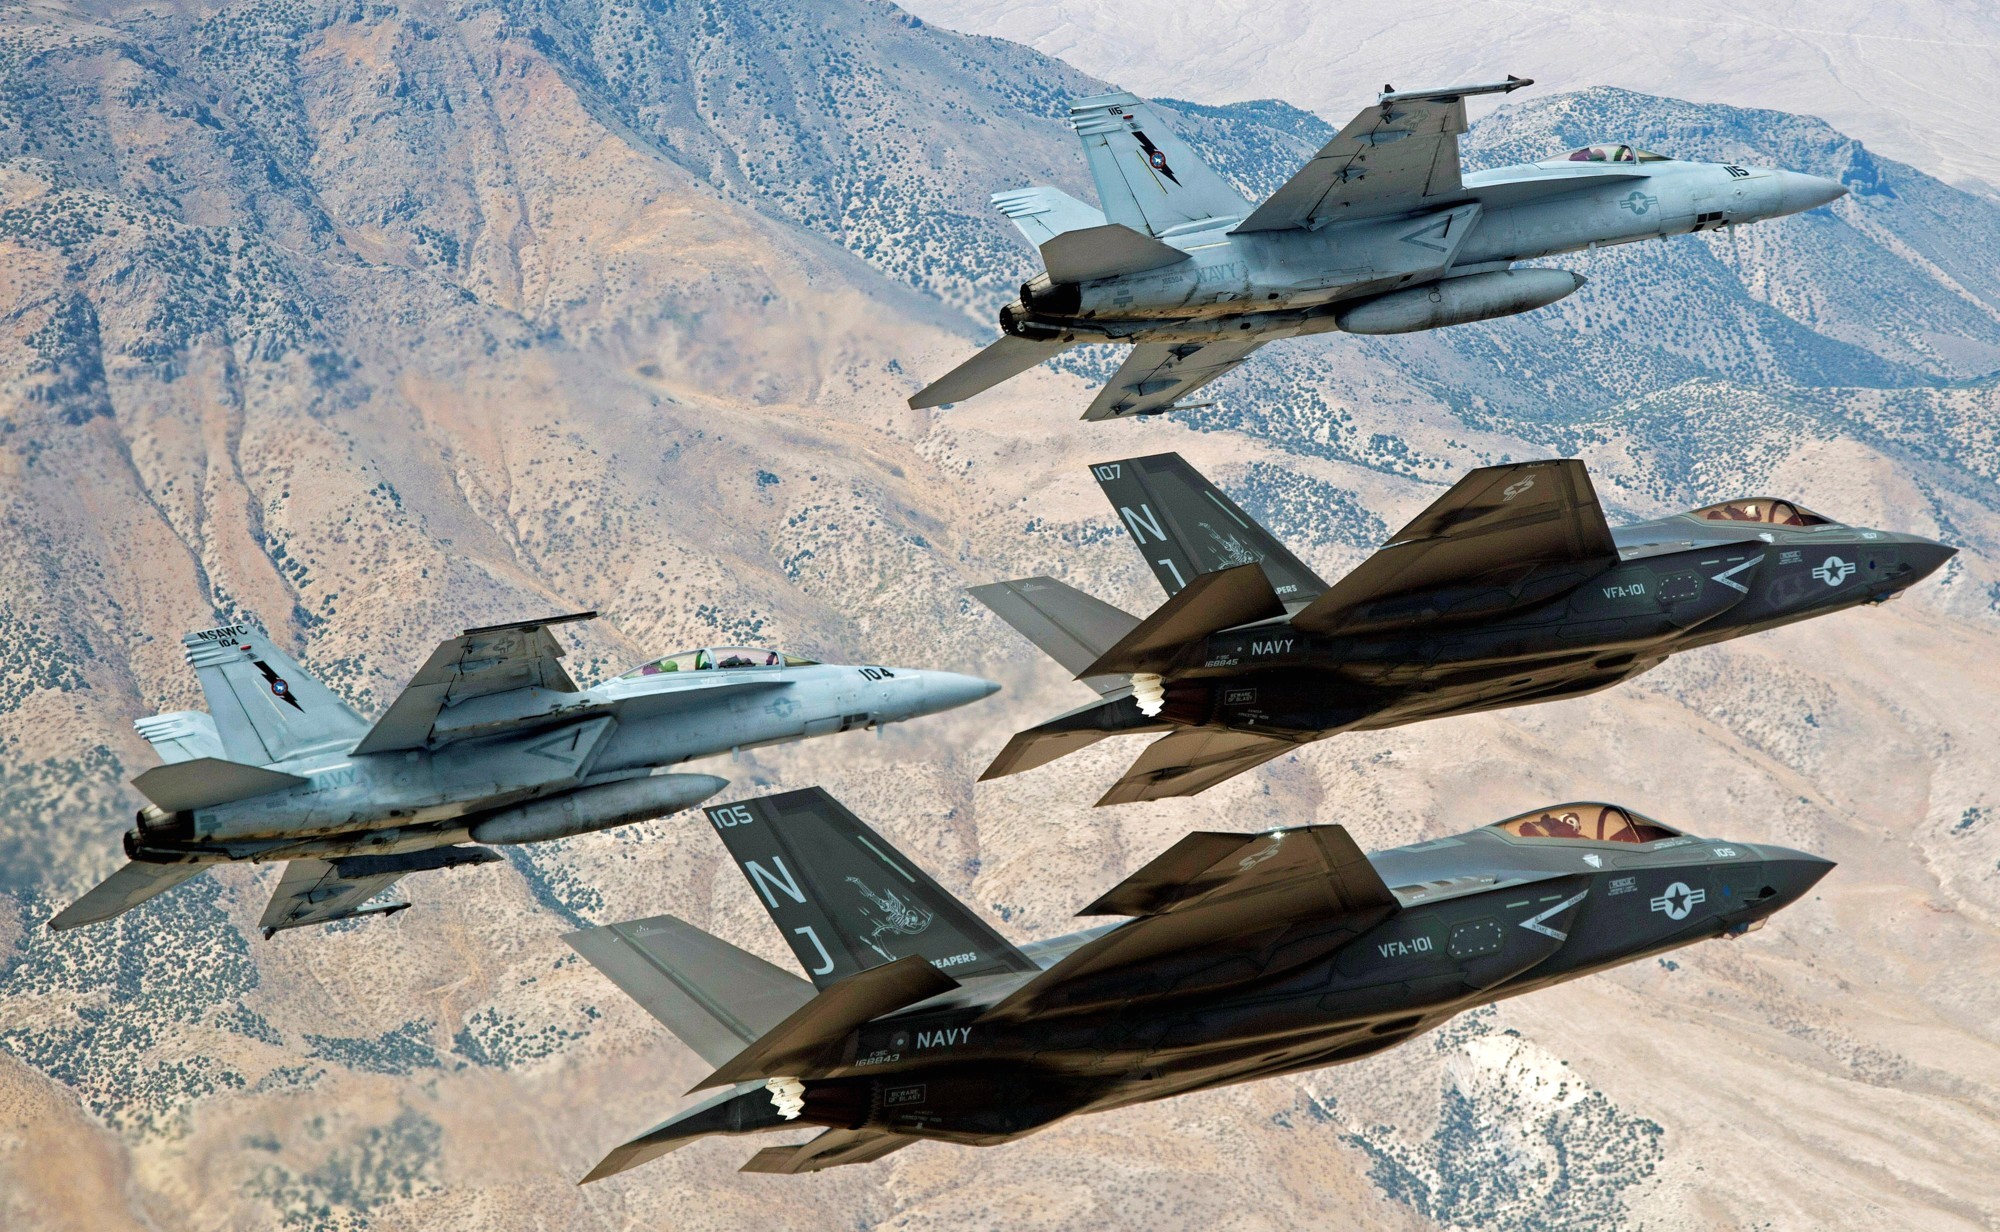 vfa-101 grim reapers strike fighter squadron us navy f-35c lightning jsf frs 54 nas fallon